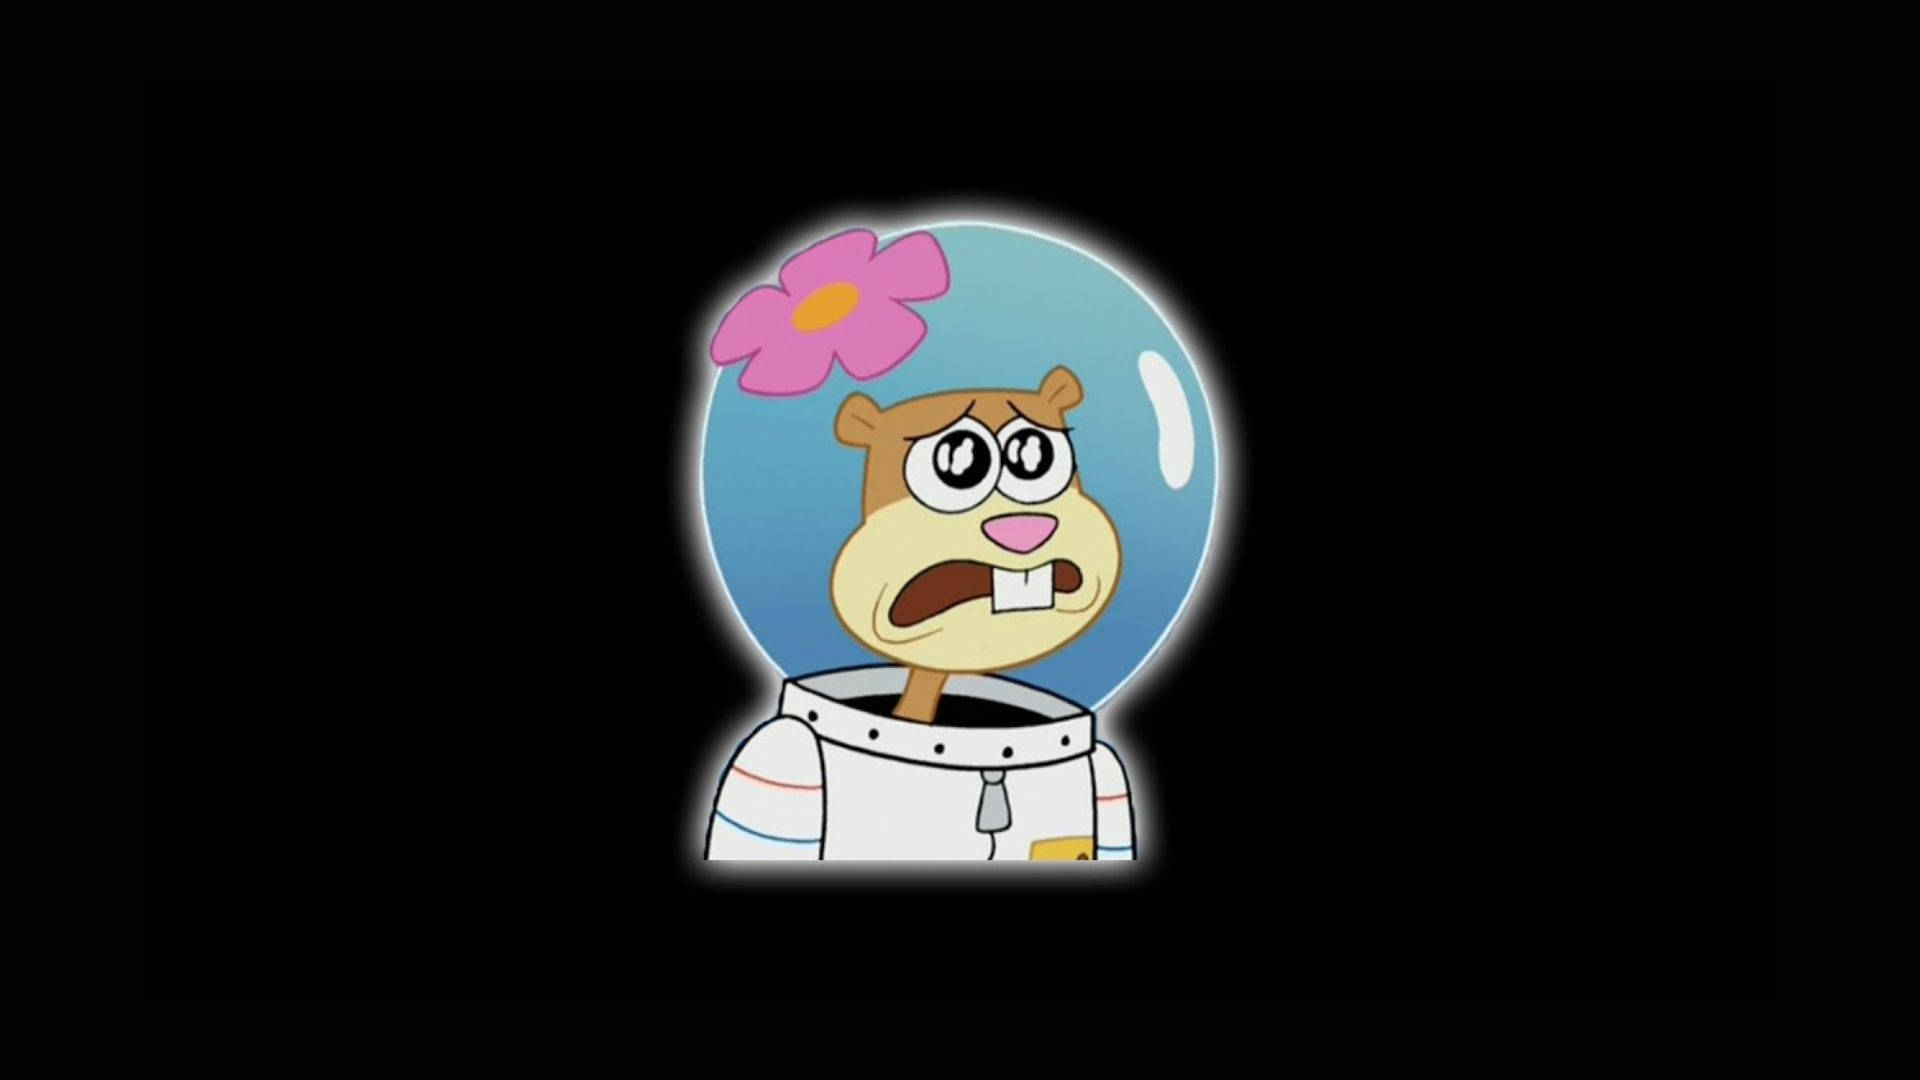 Top 999+ Sandy Cheeks Wallpapers Full HD, 4K✅Free to Use